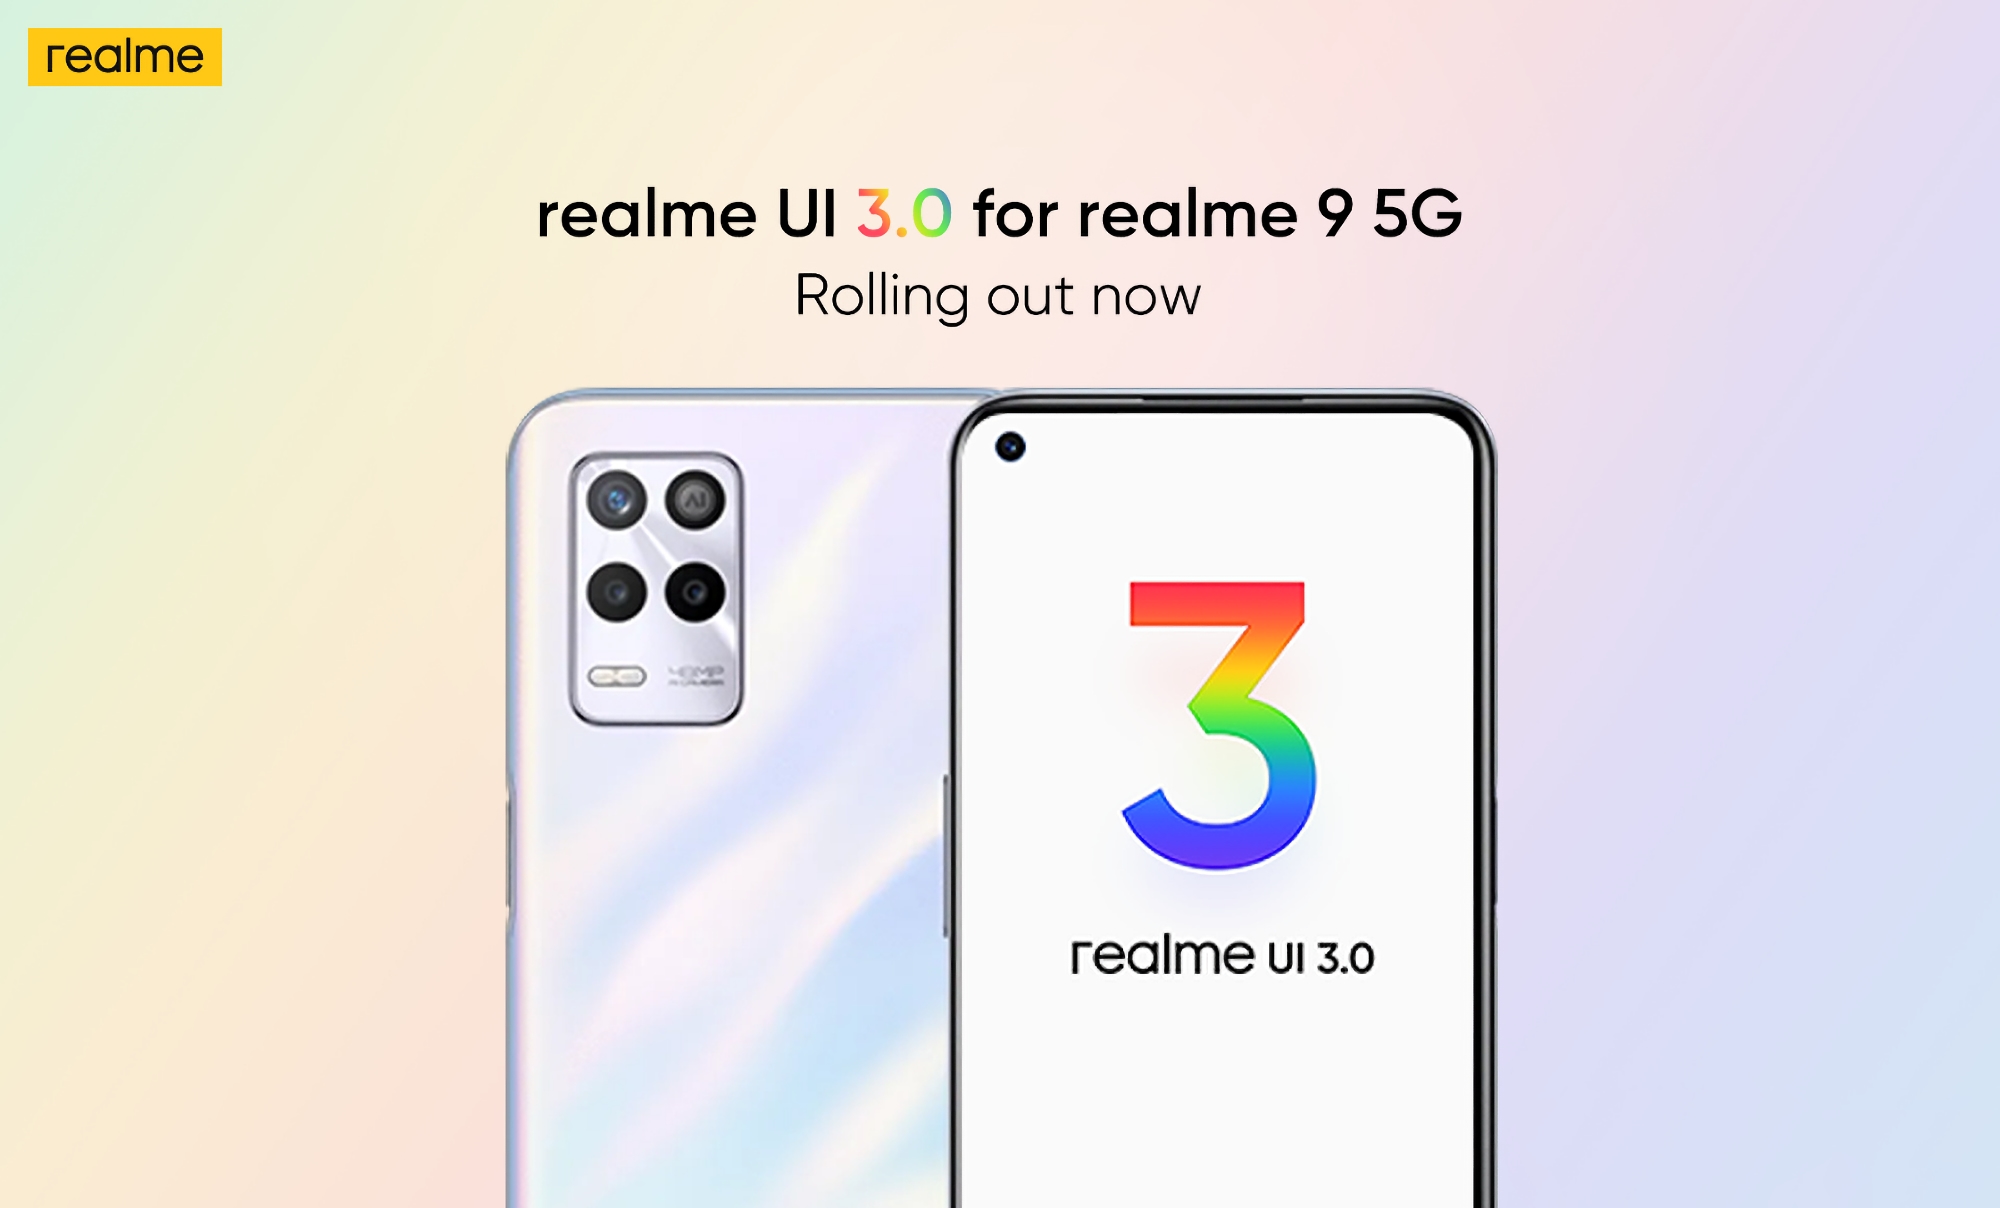 realme 9 5G got a stable version of realme UI 3.0 based on Android 12